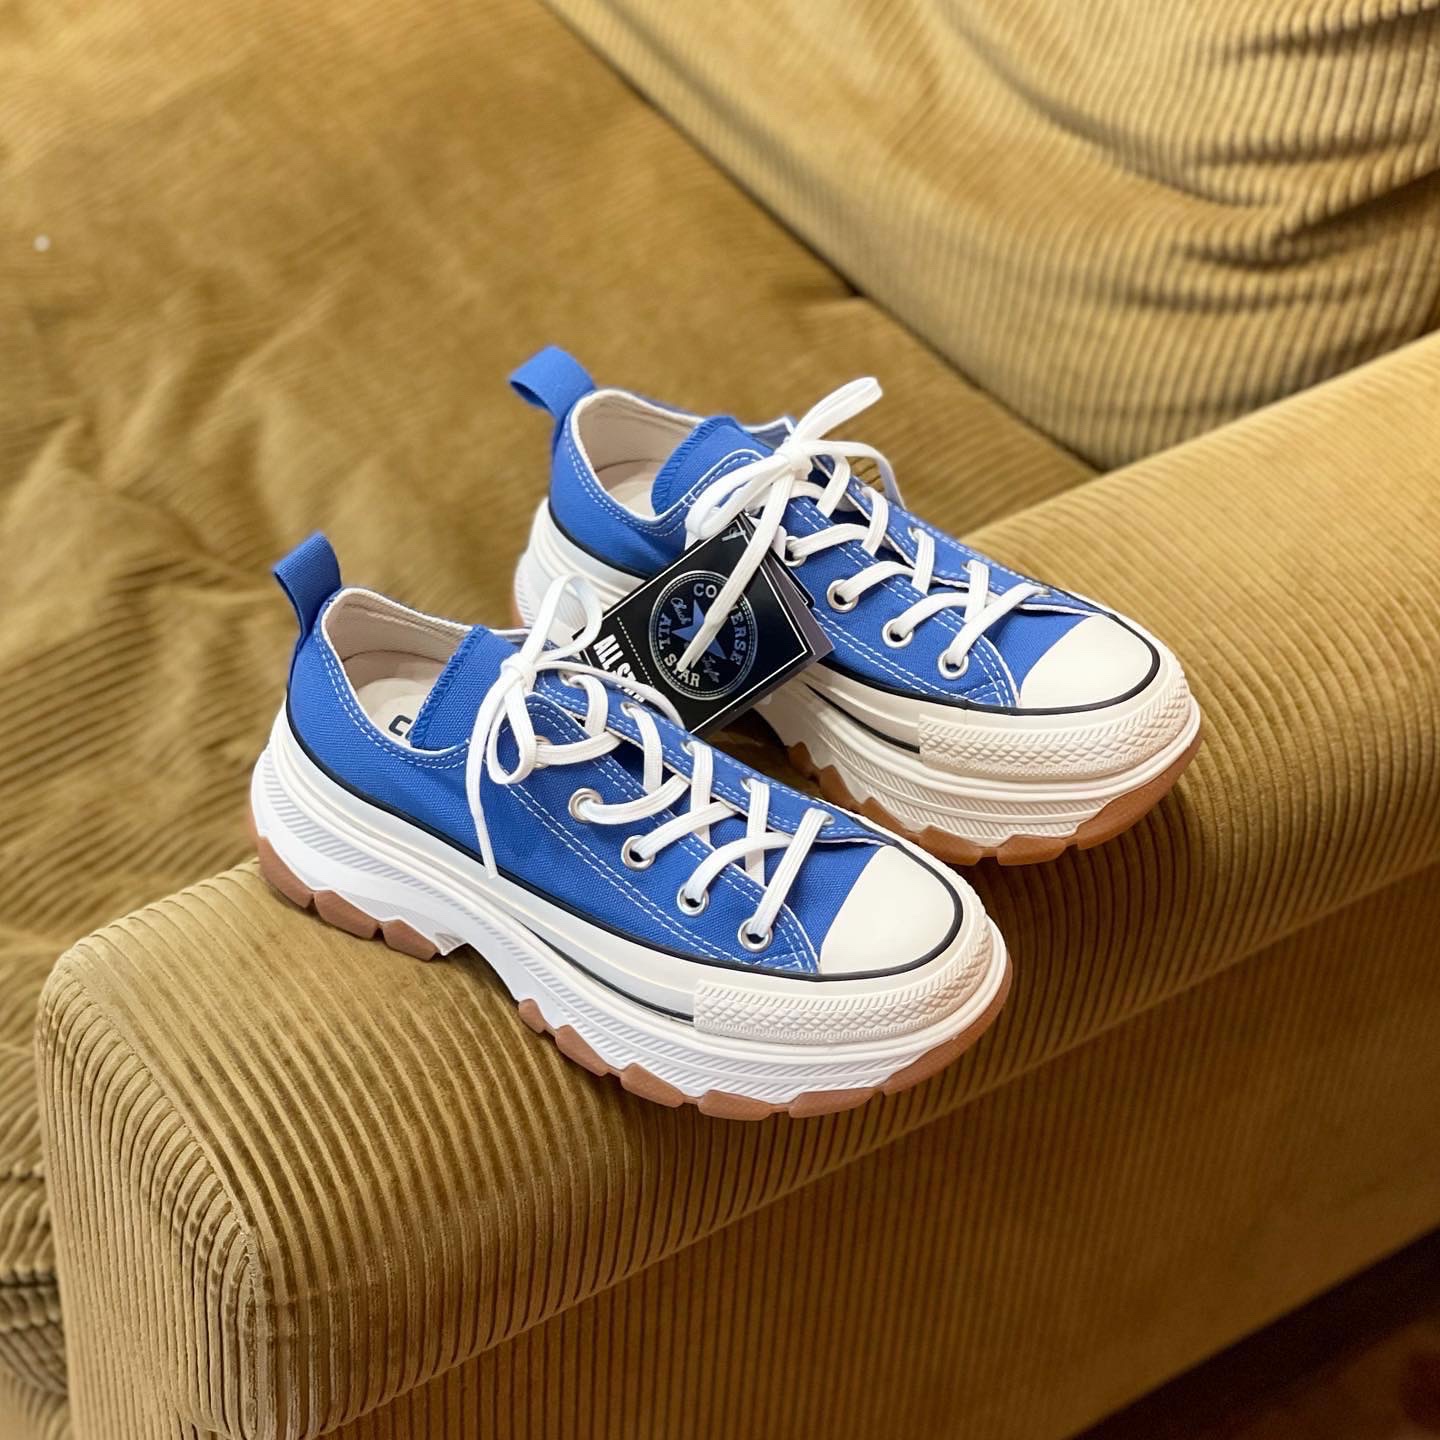 CONVERSE ALL STAR 100 TREKWAVE OX MINERAL BLUE